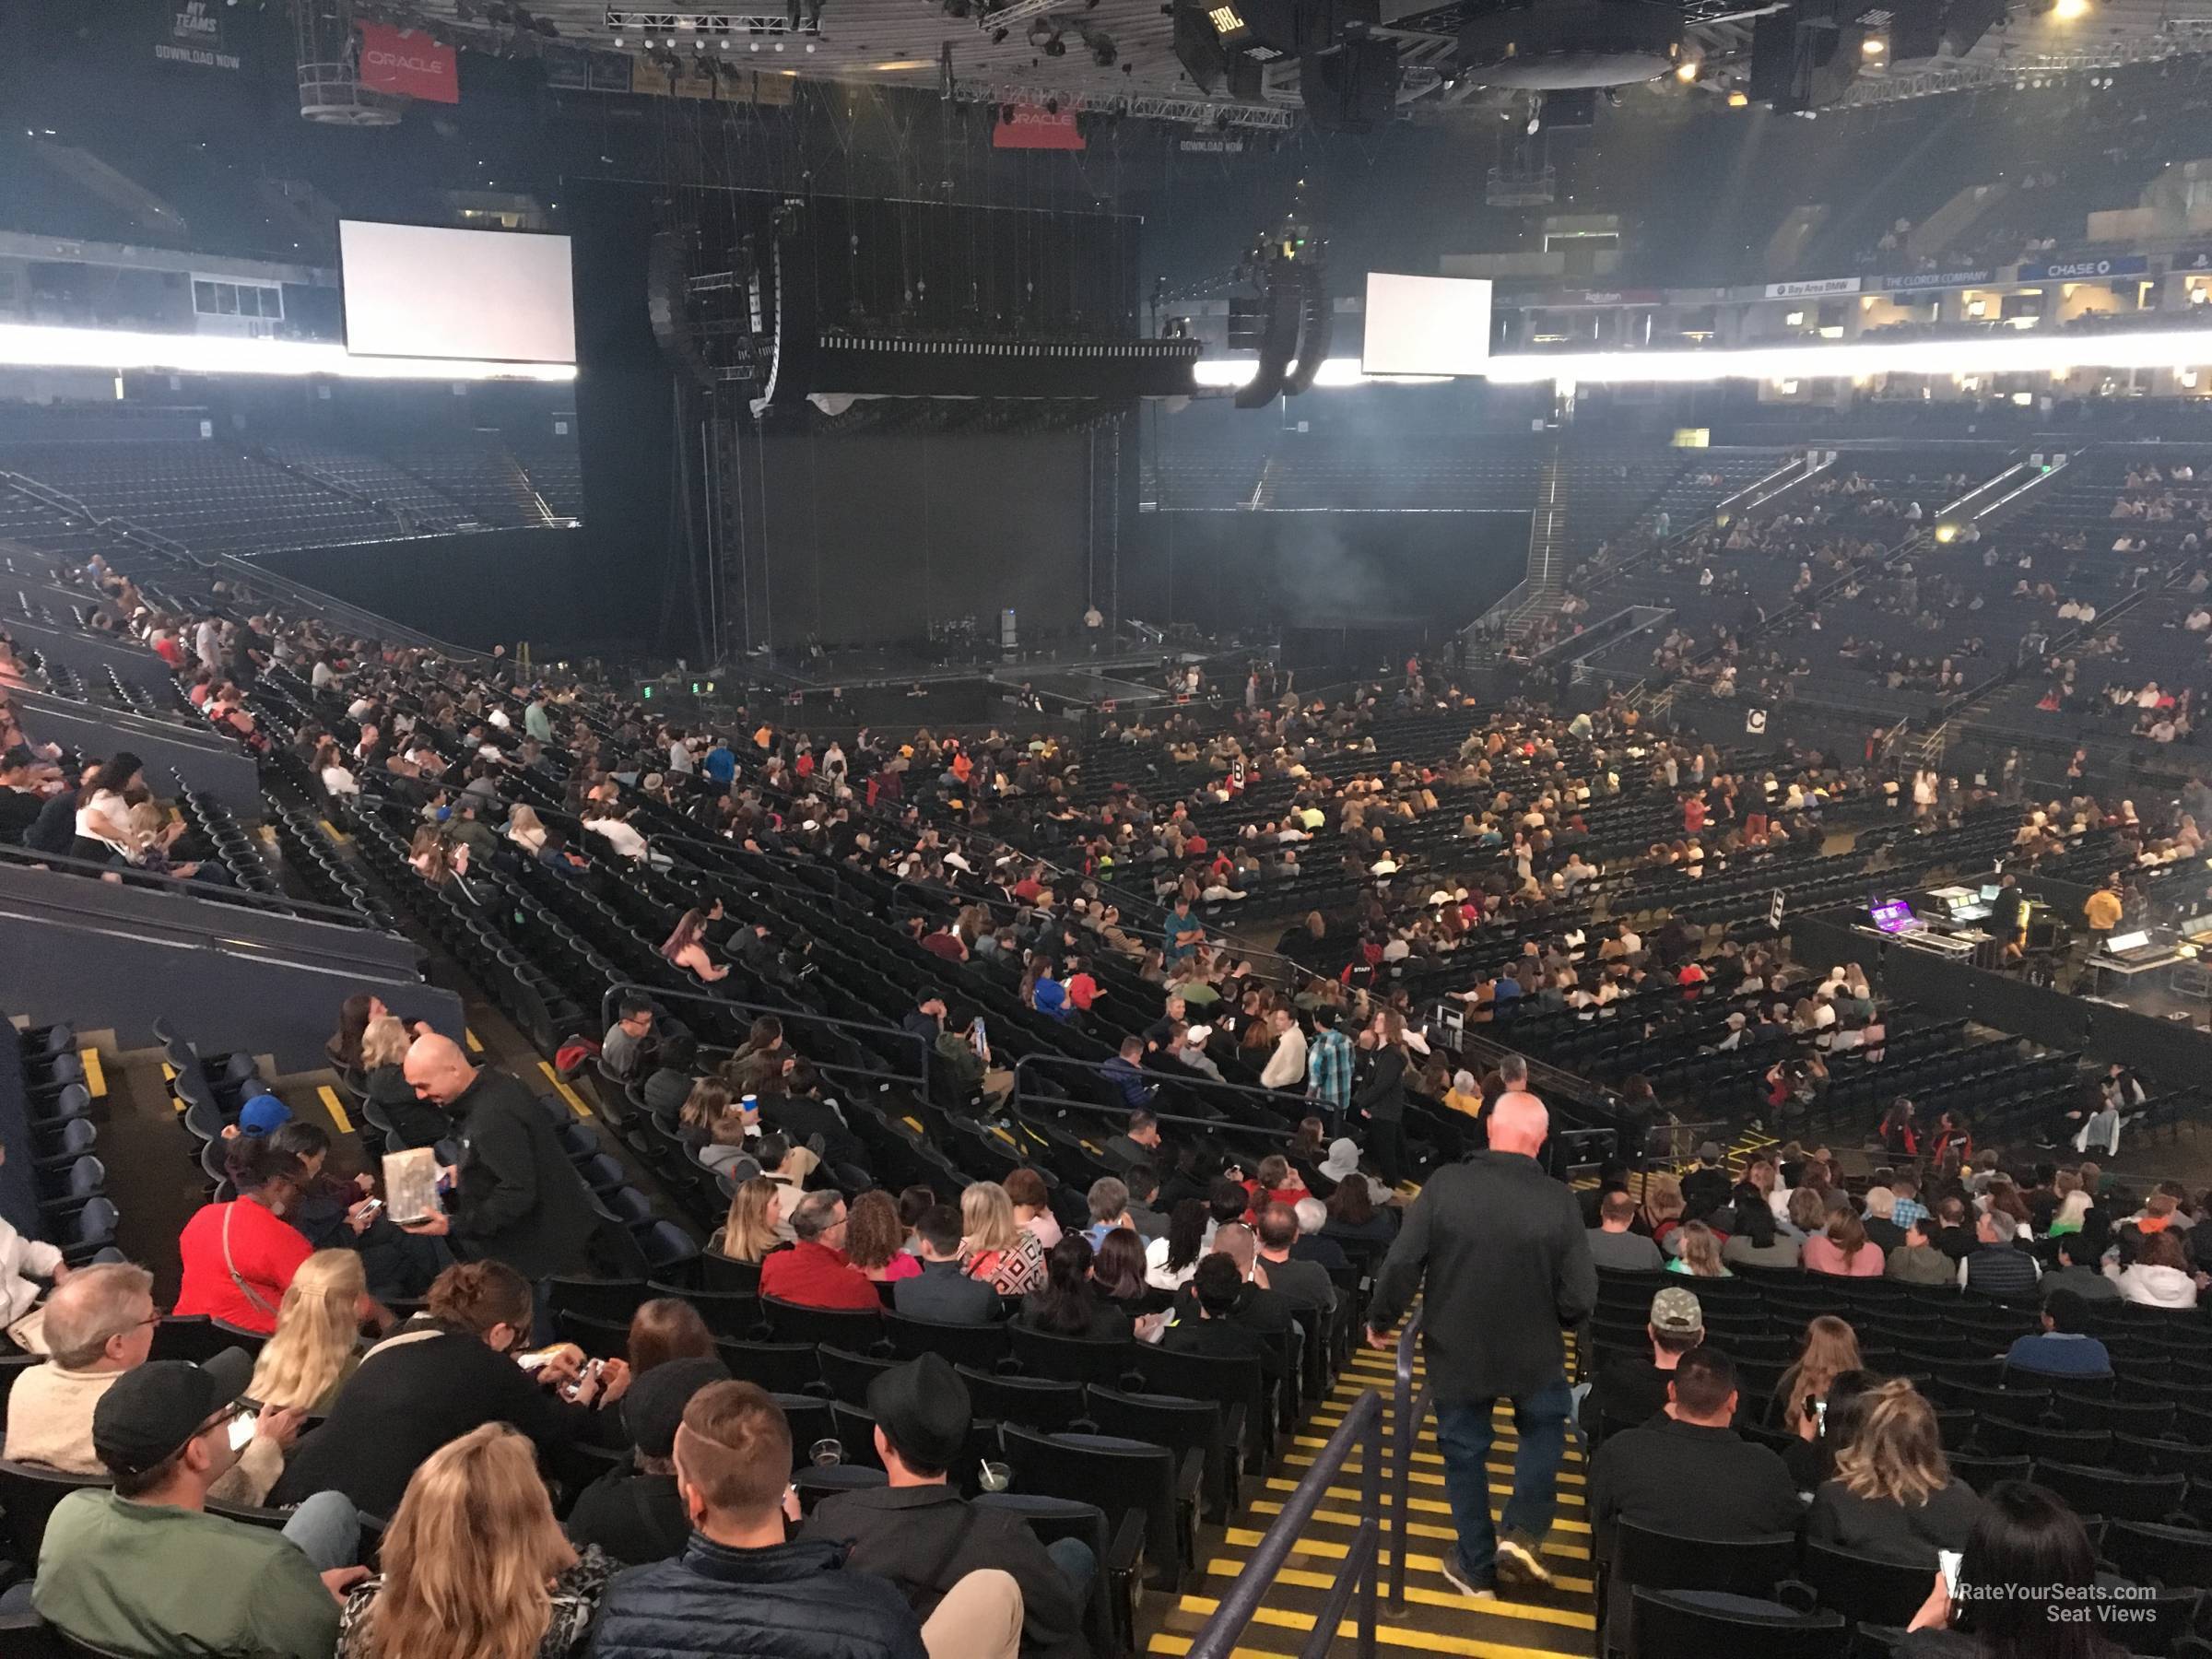 section 110, row 27 seat view  - oakland arena